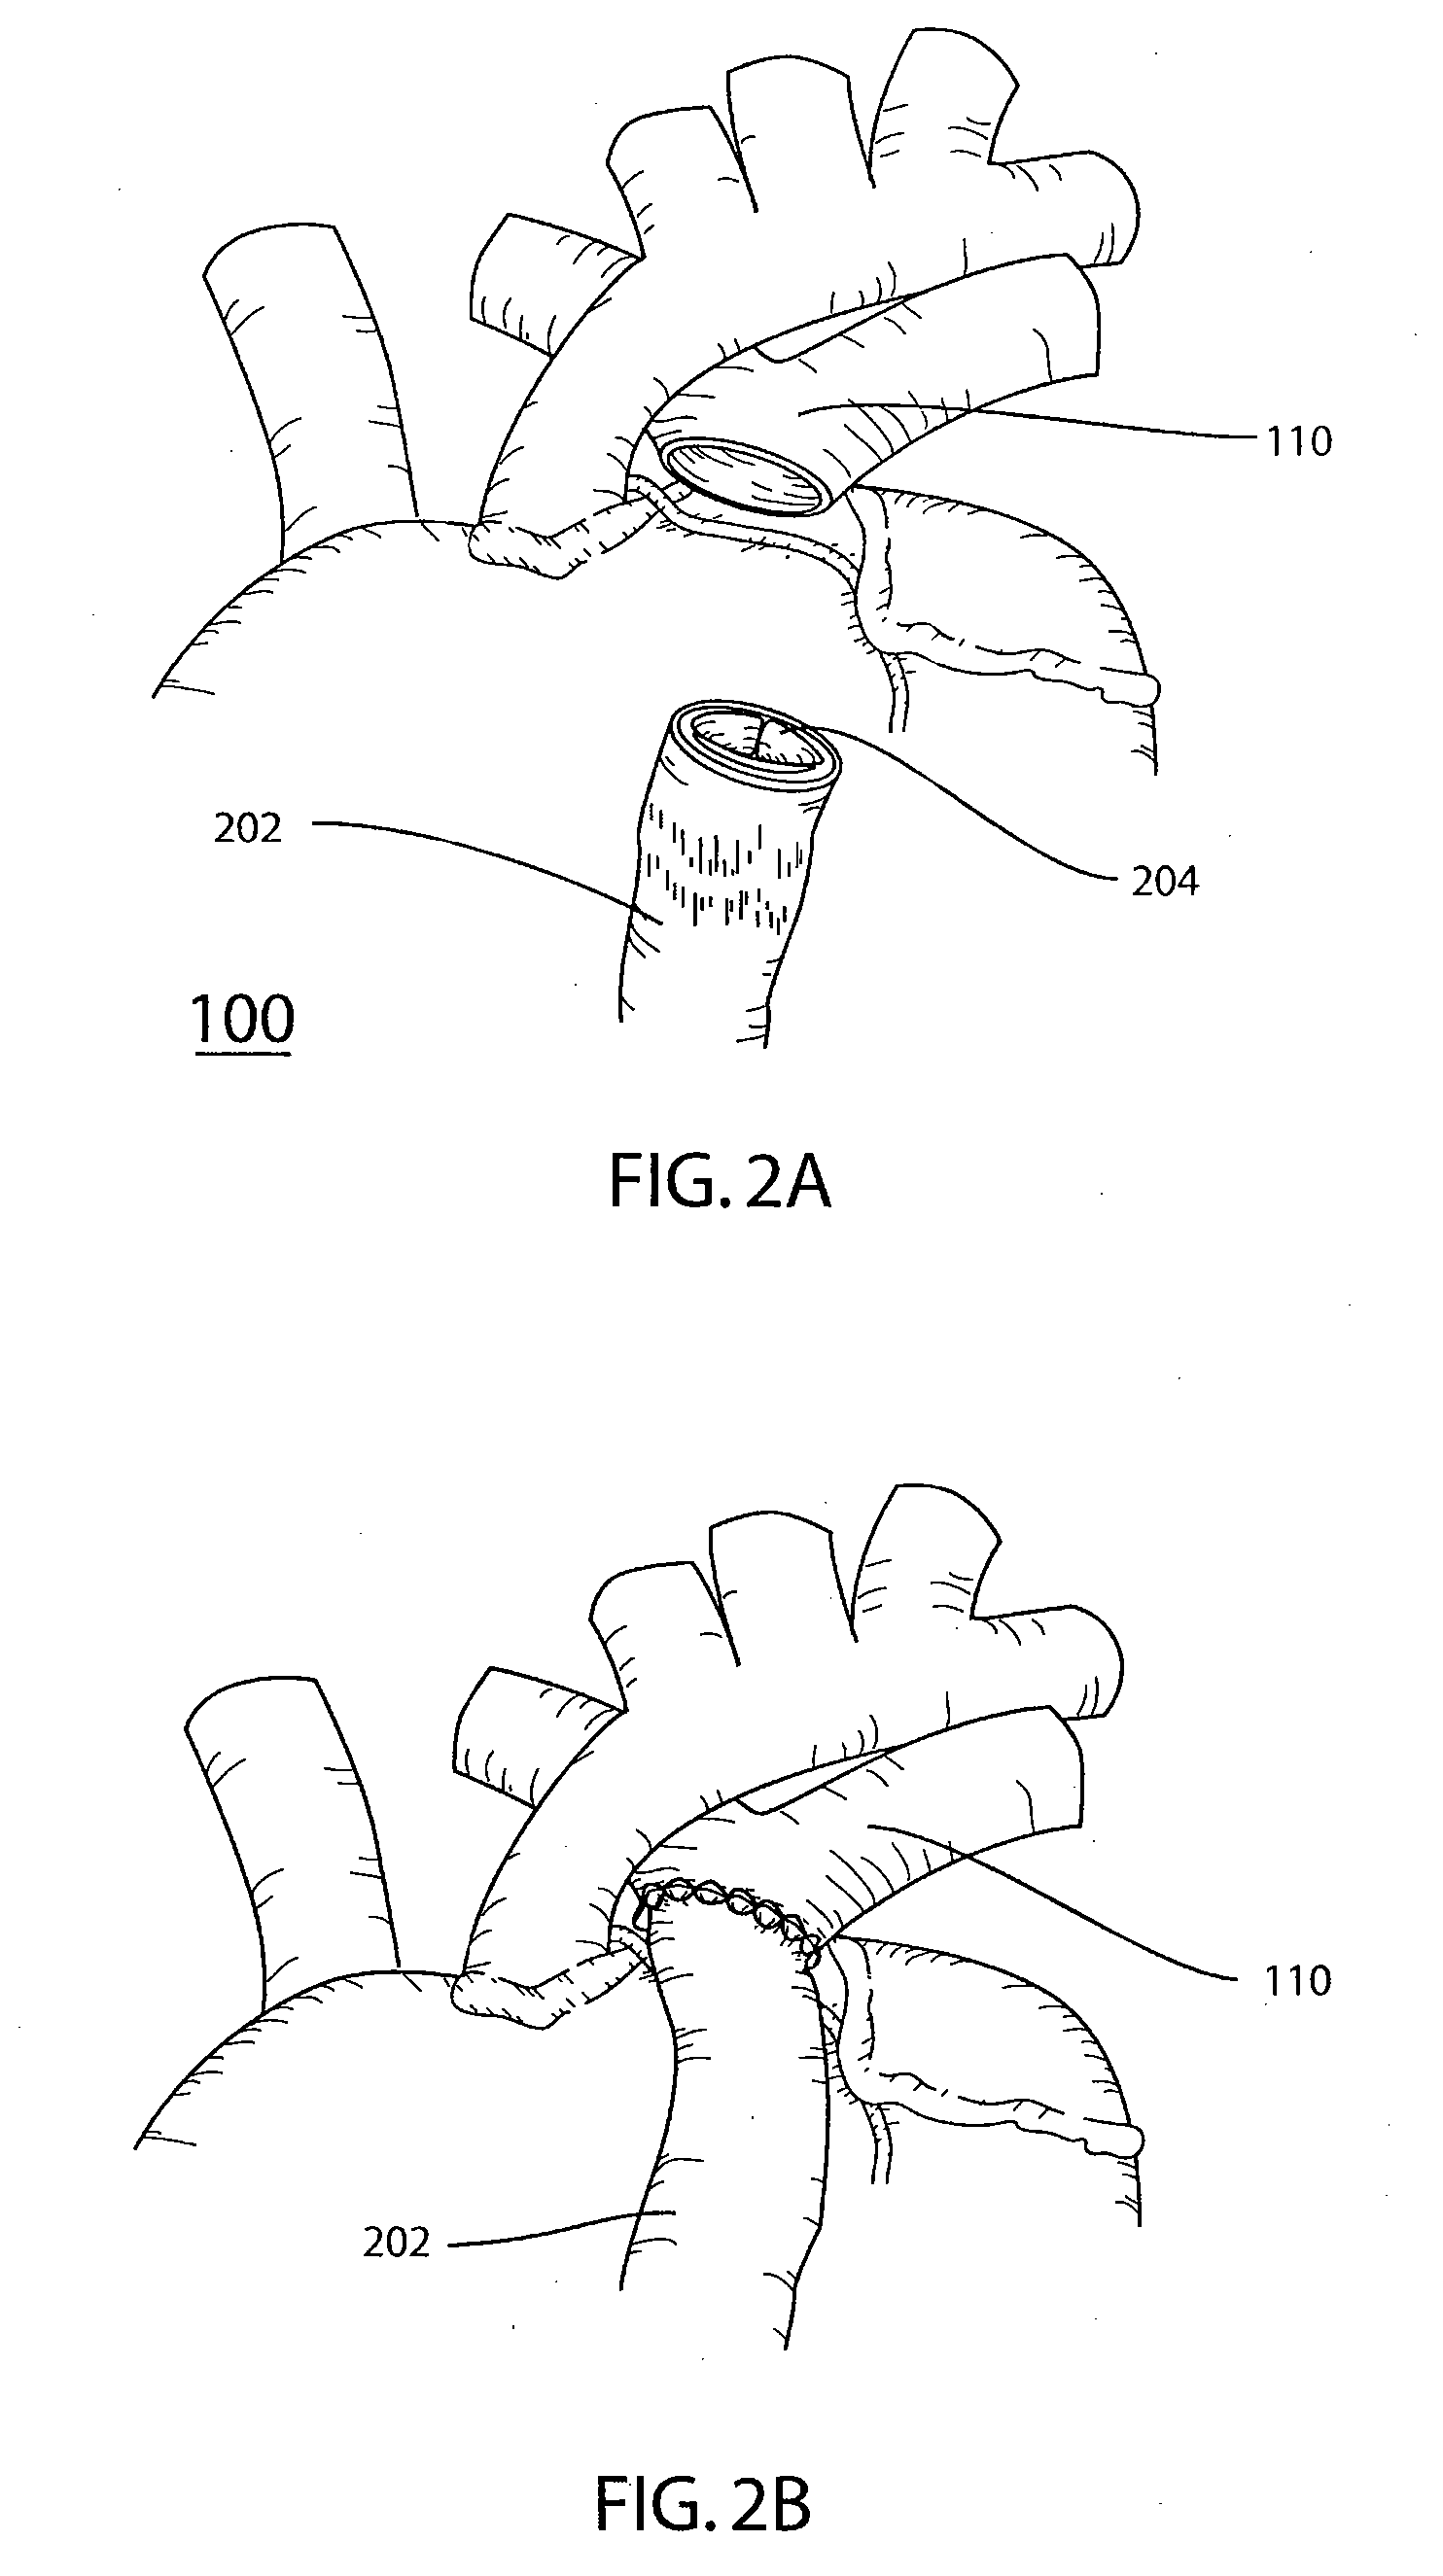 Stent Foundation for Placement of a Stented Valve